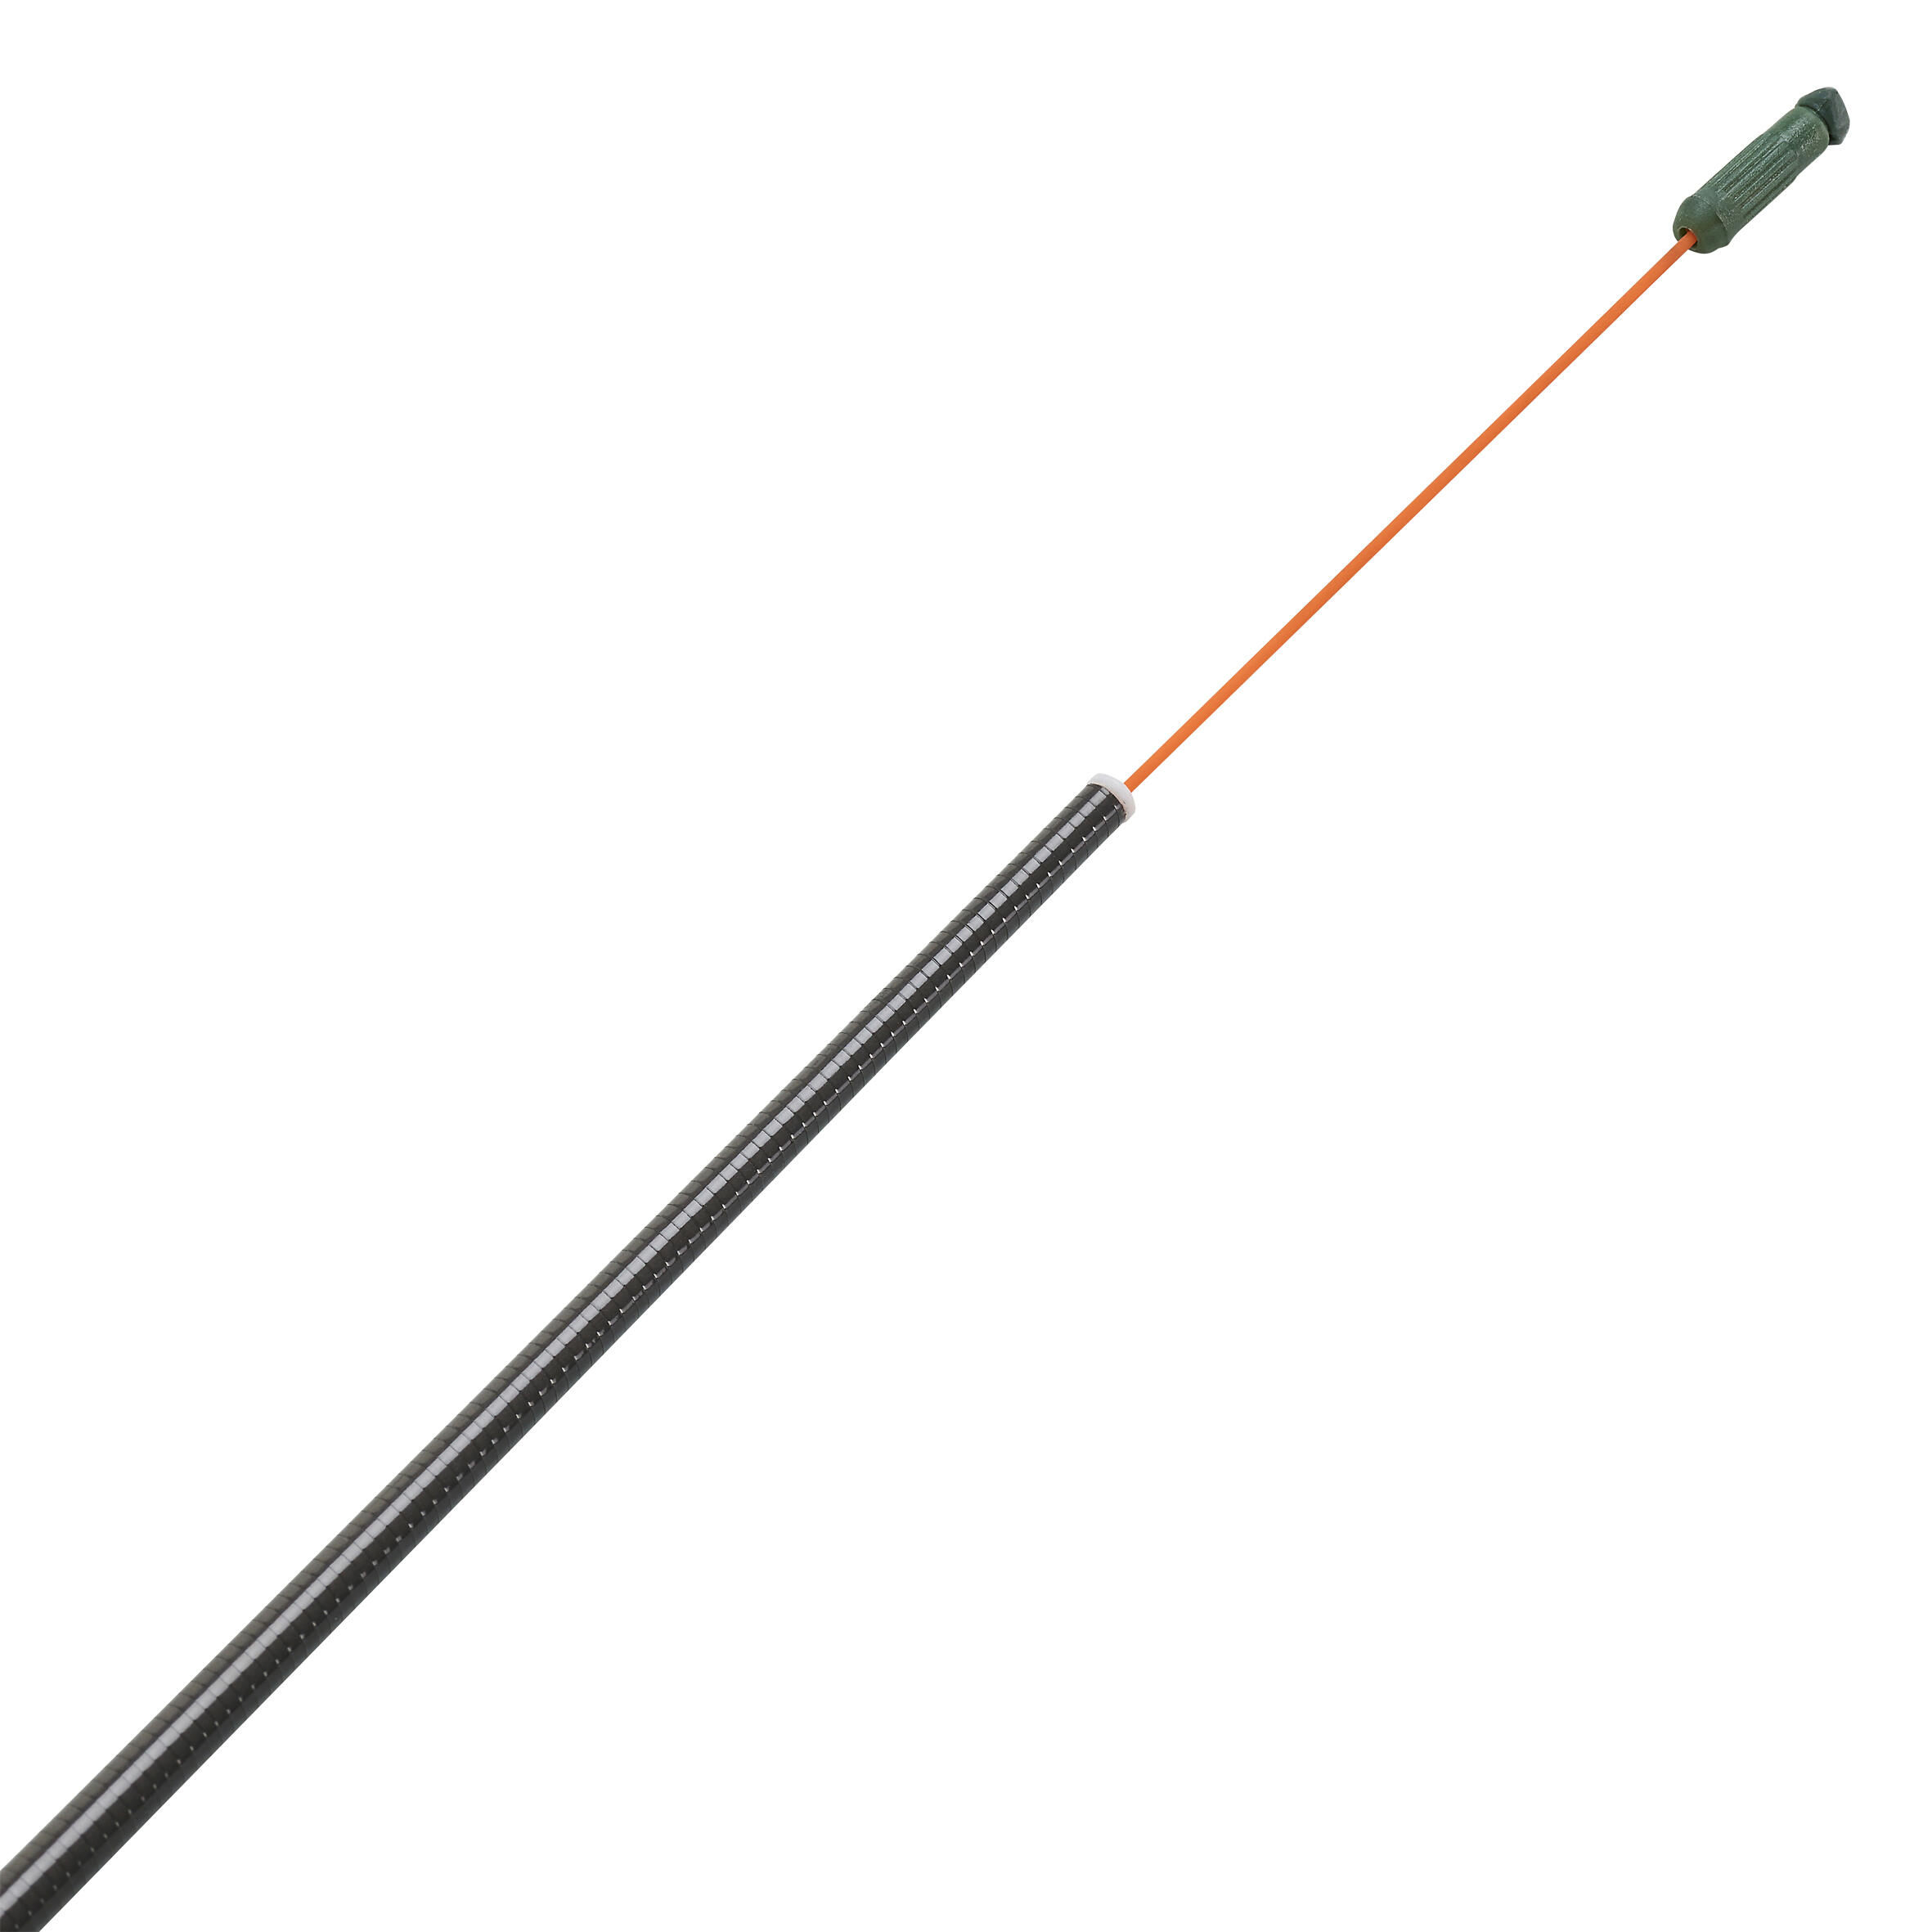 ROD NORTHLAKE 100 9.5M FOR FISHING WHITEFISH WITH PRESS-FIT RODS 5/7